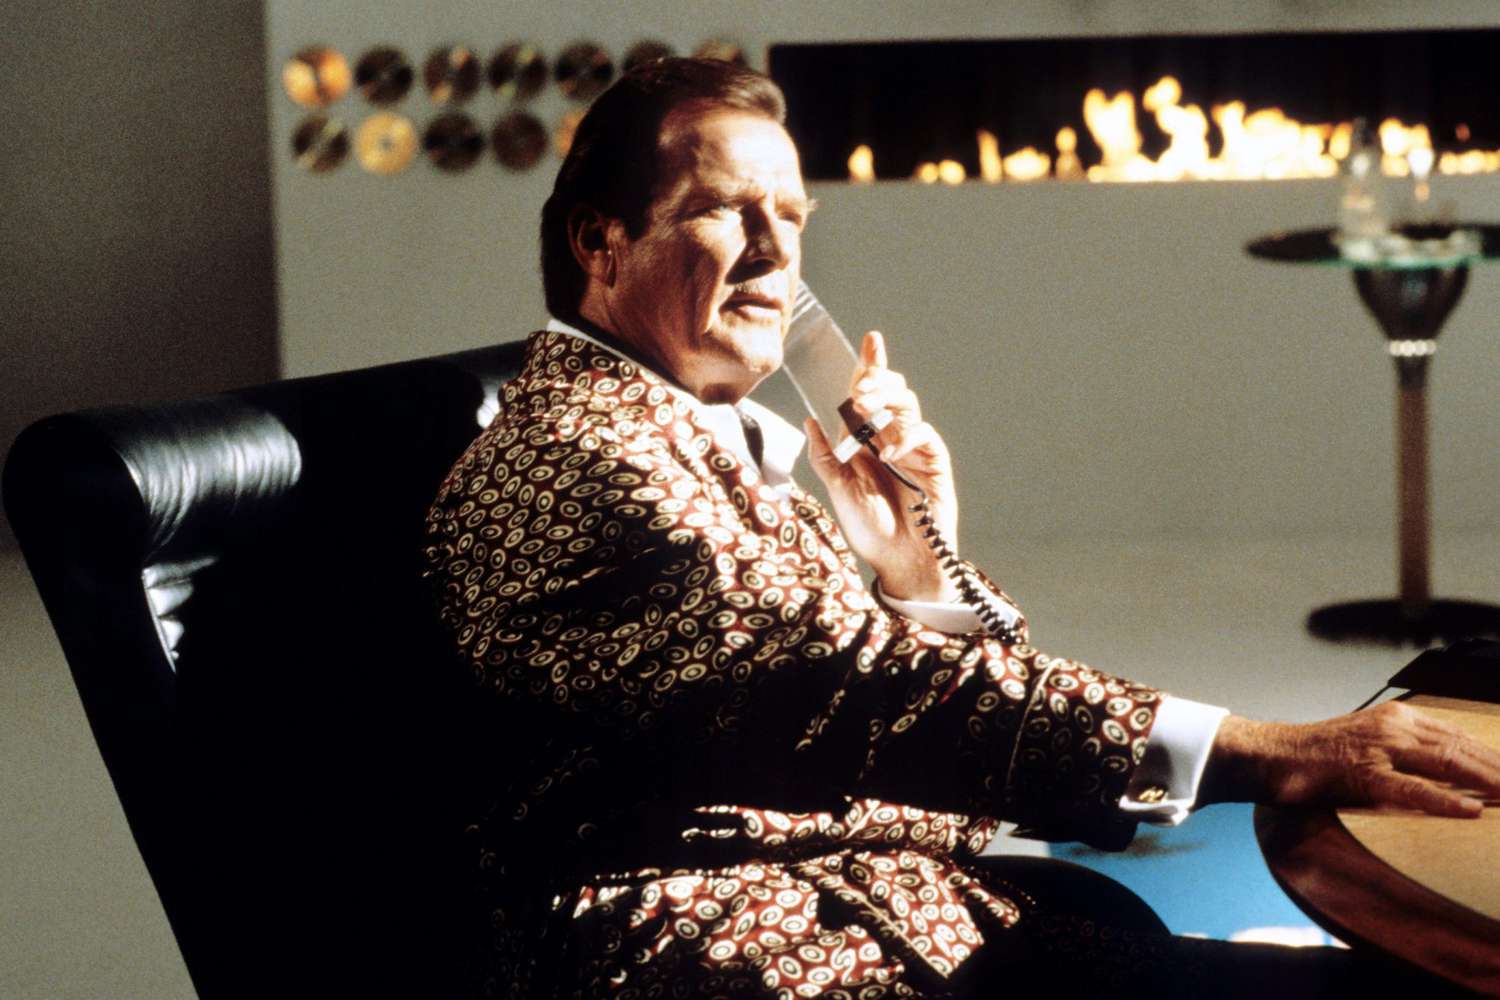 SPICE WORLD, Roger Moore, 1997, &copy; Columbia/courtesy Everett Collection